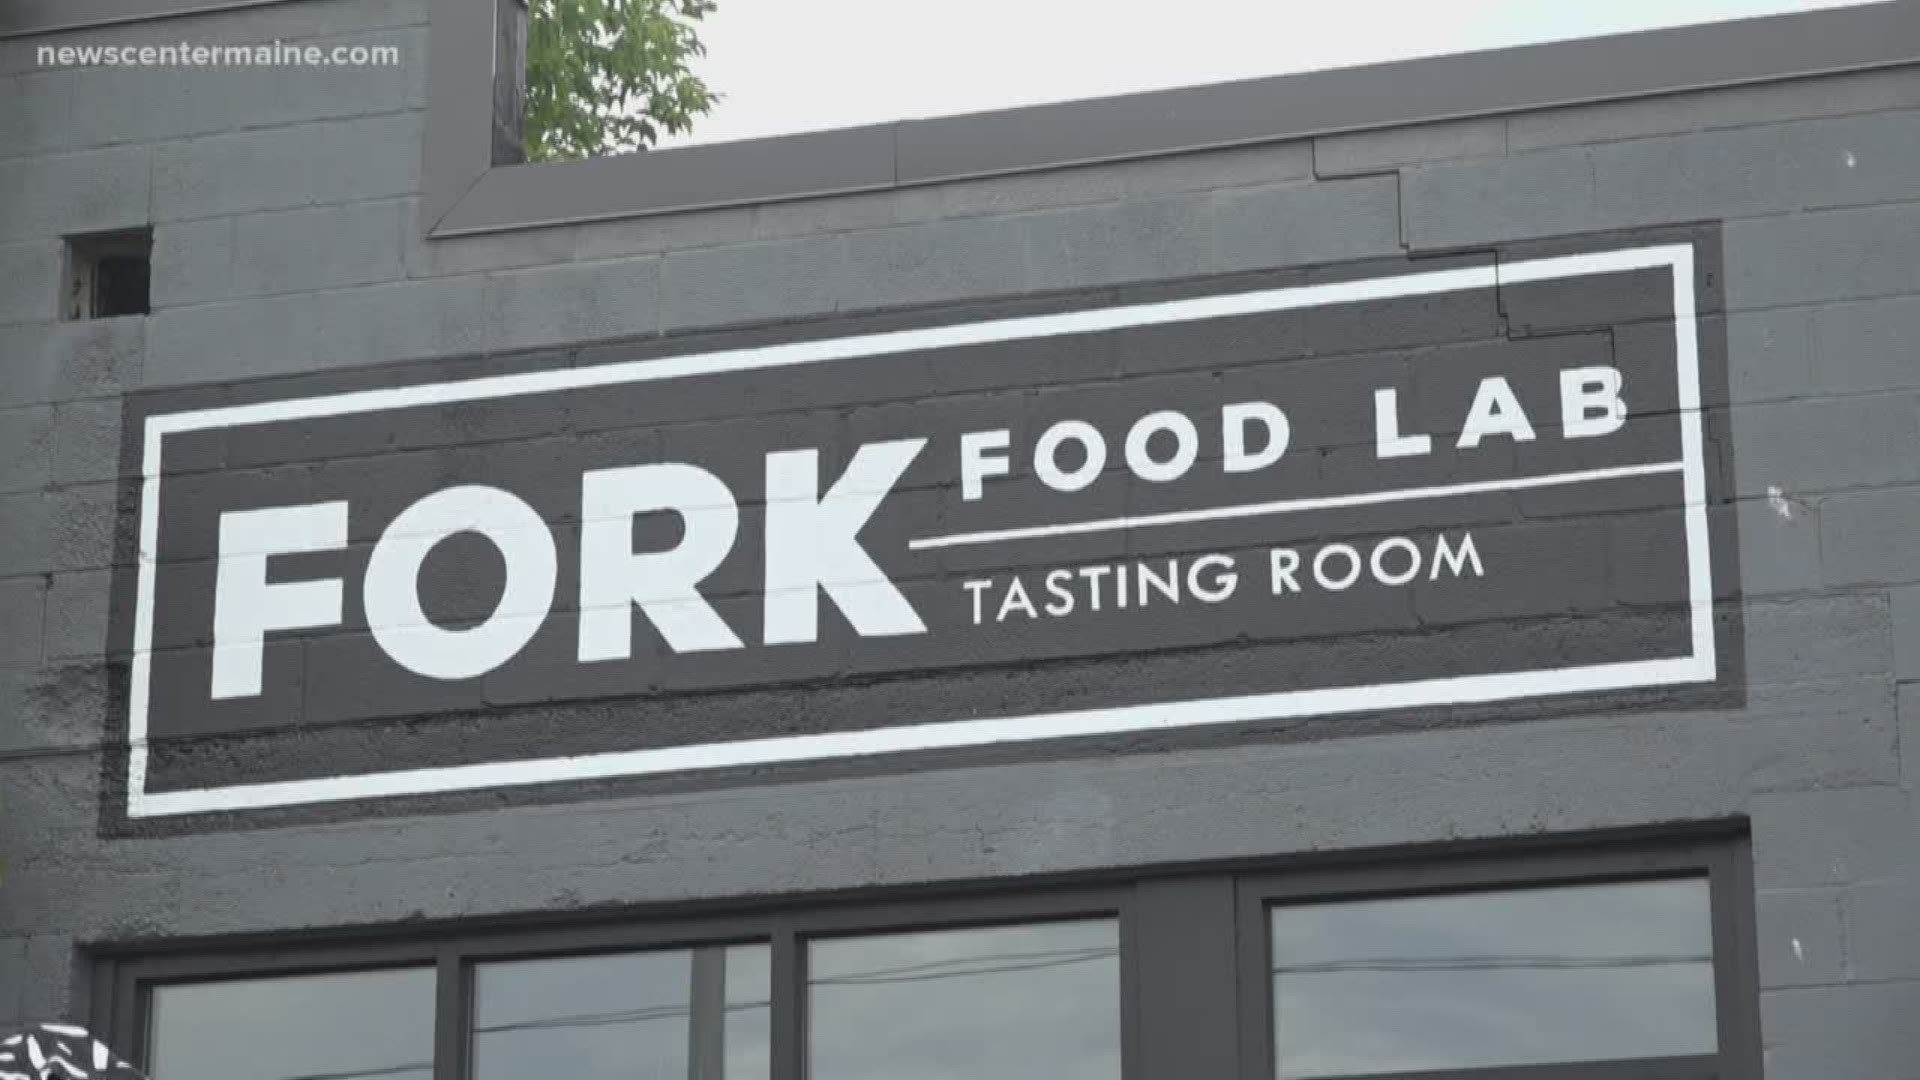 NOW: Portland's Fork Food Lab closes